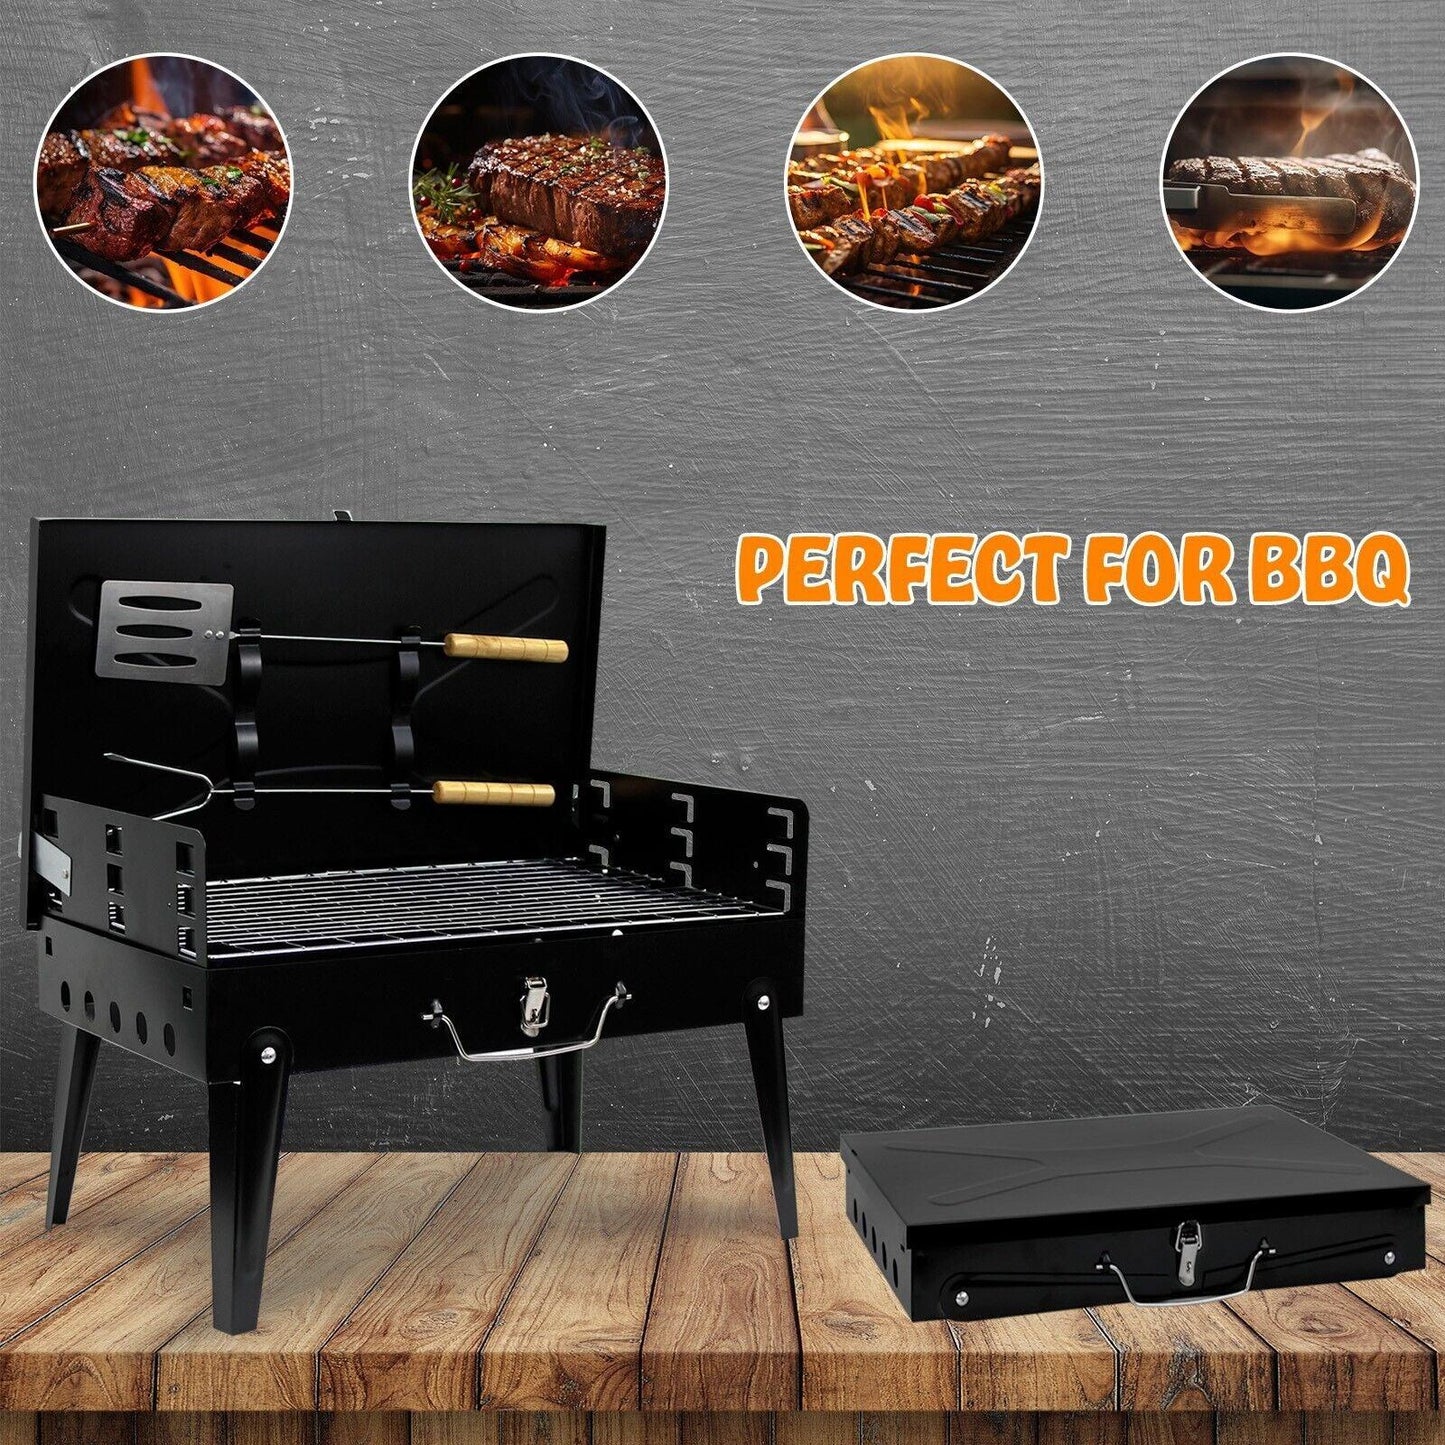 Portable Folding Charcoal BBQ: Camping Grill for Outdoor Picnics - Click